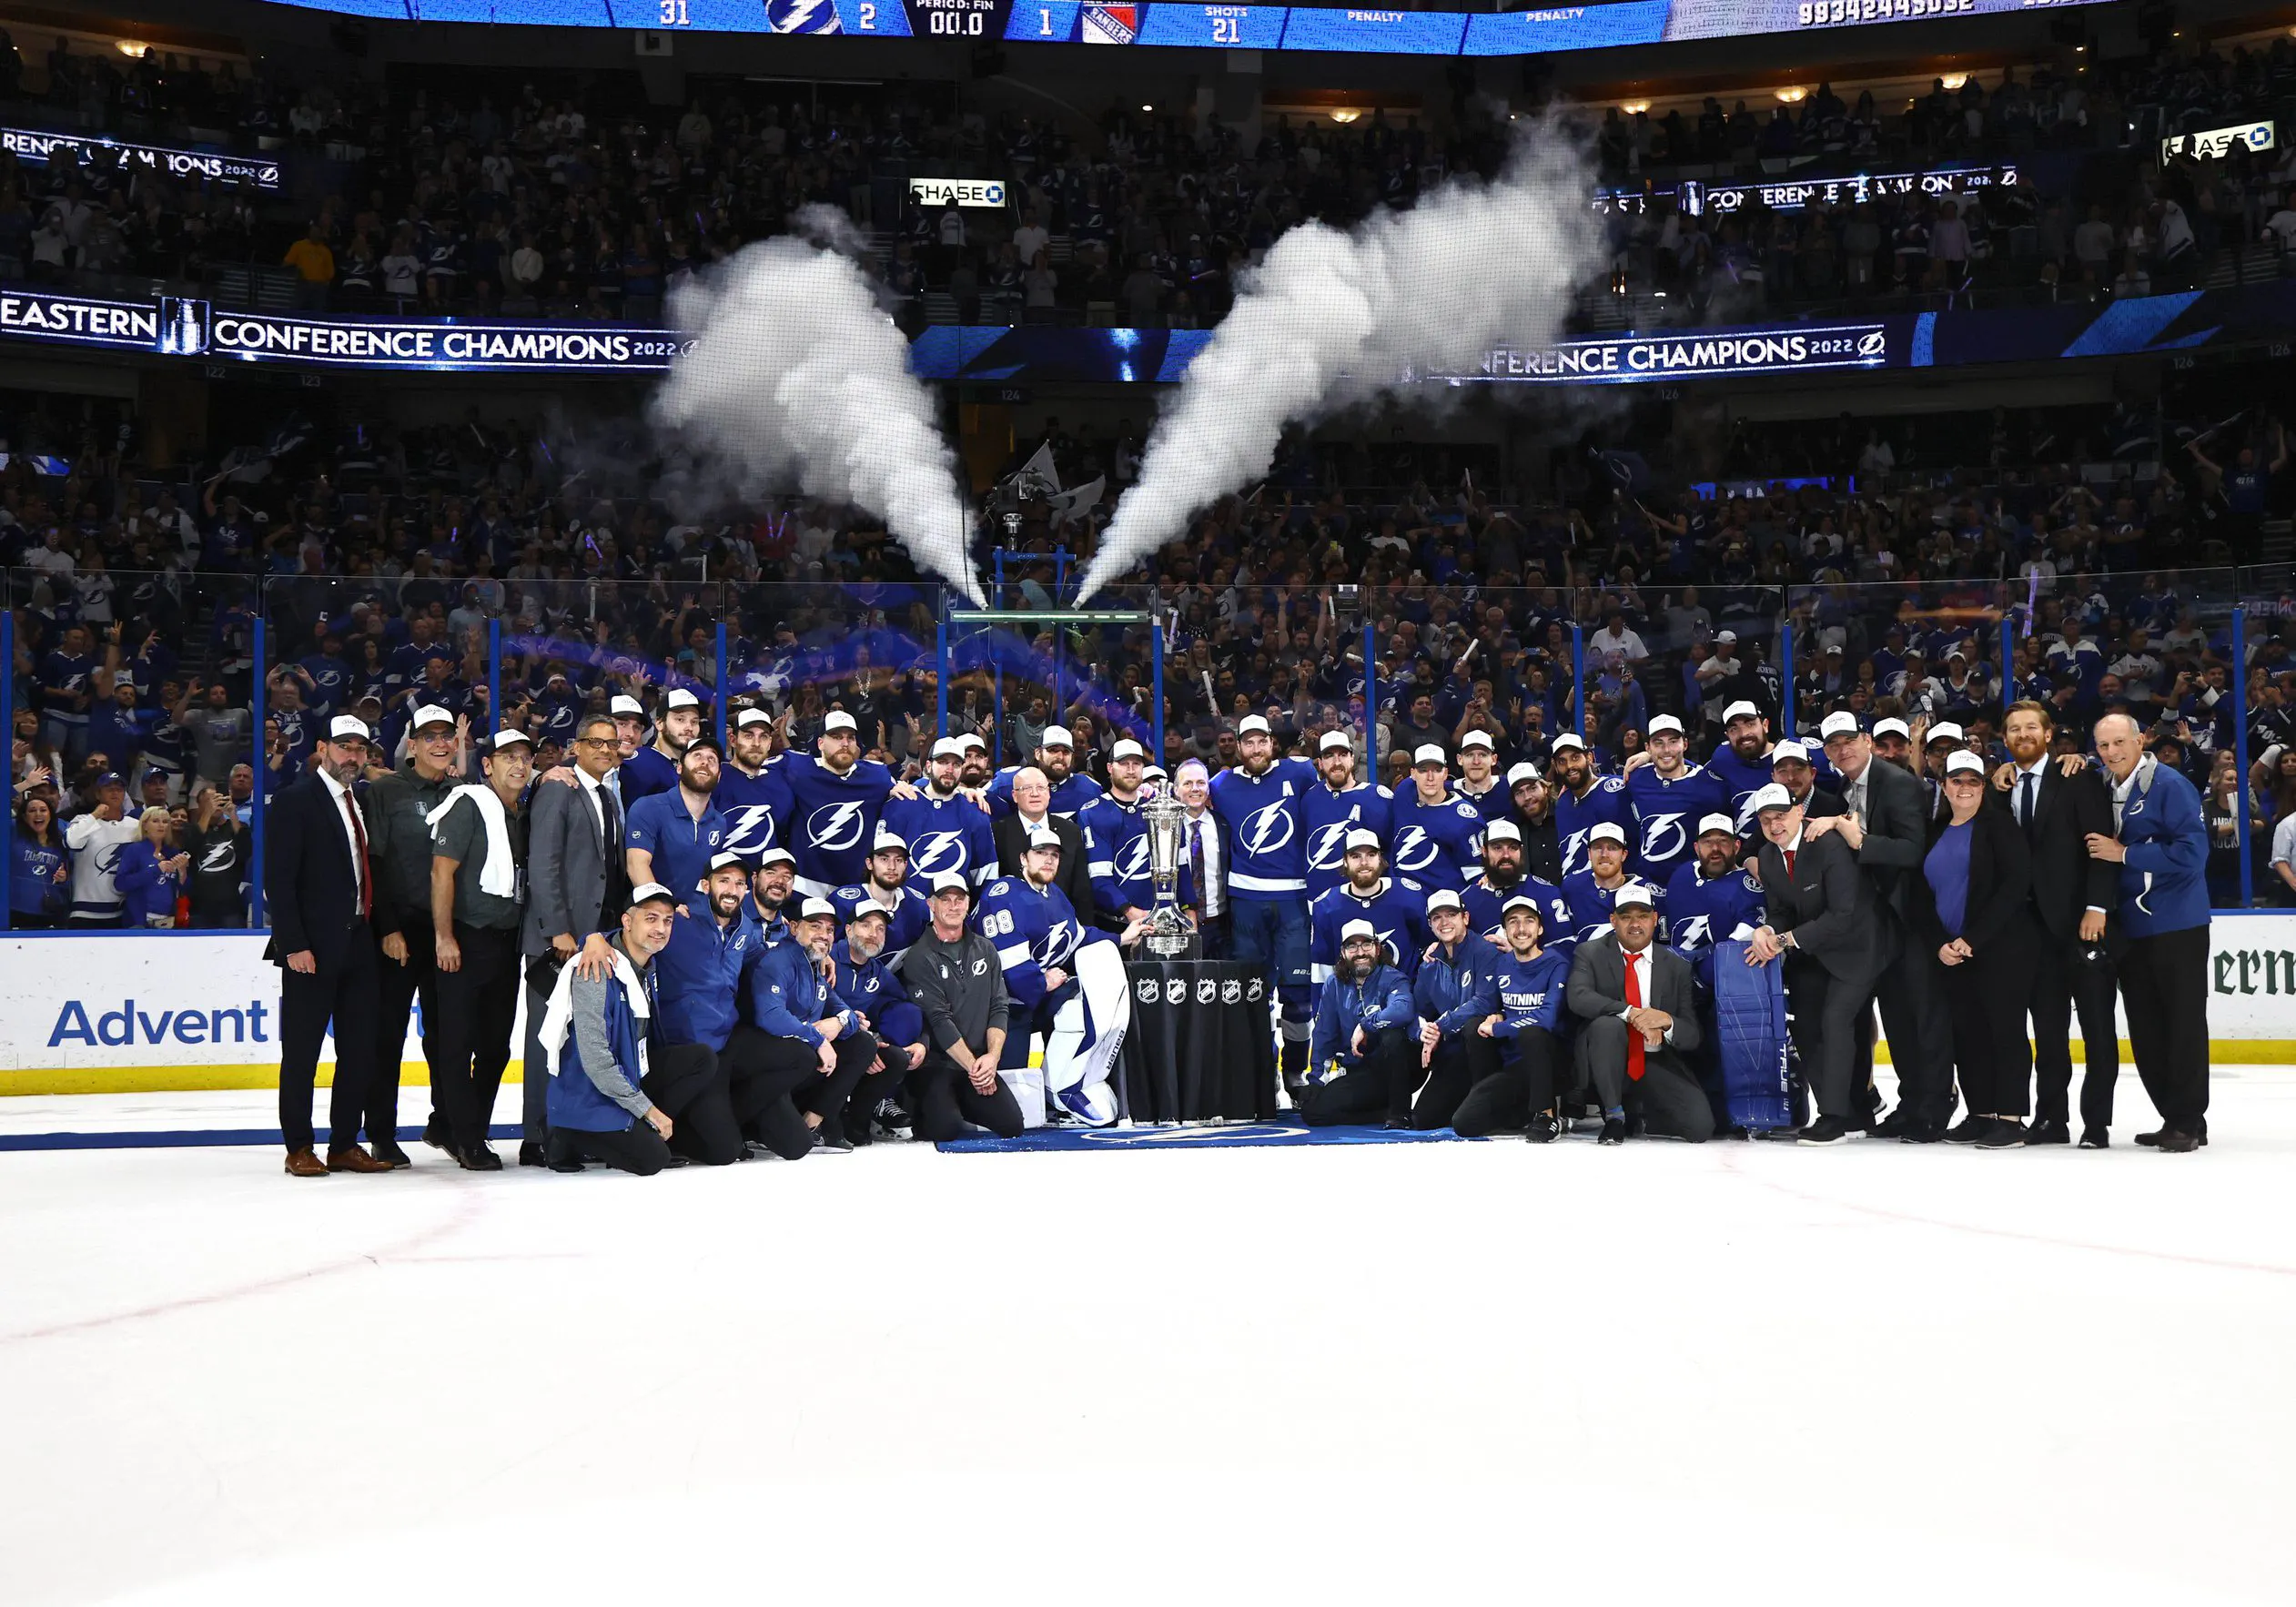 Stanley Cup Playoffs Day 41: Steven Stamkos scores both goals to send Tampa Bay Lightning to third straight Stanley Cup Final